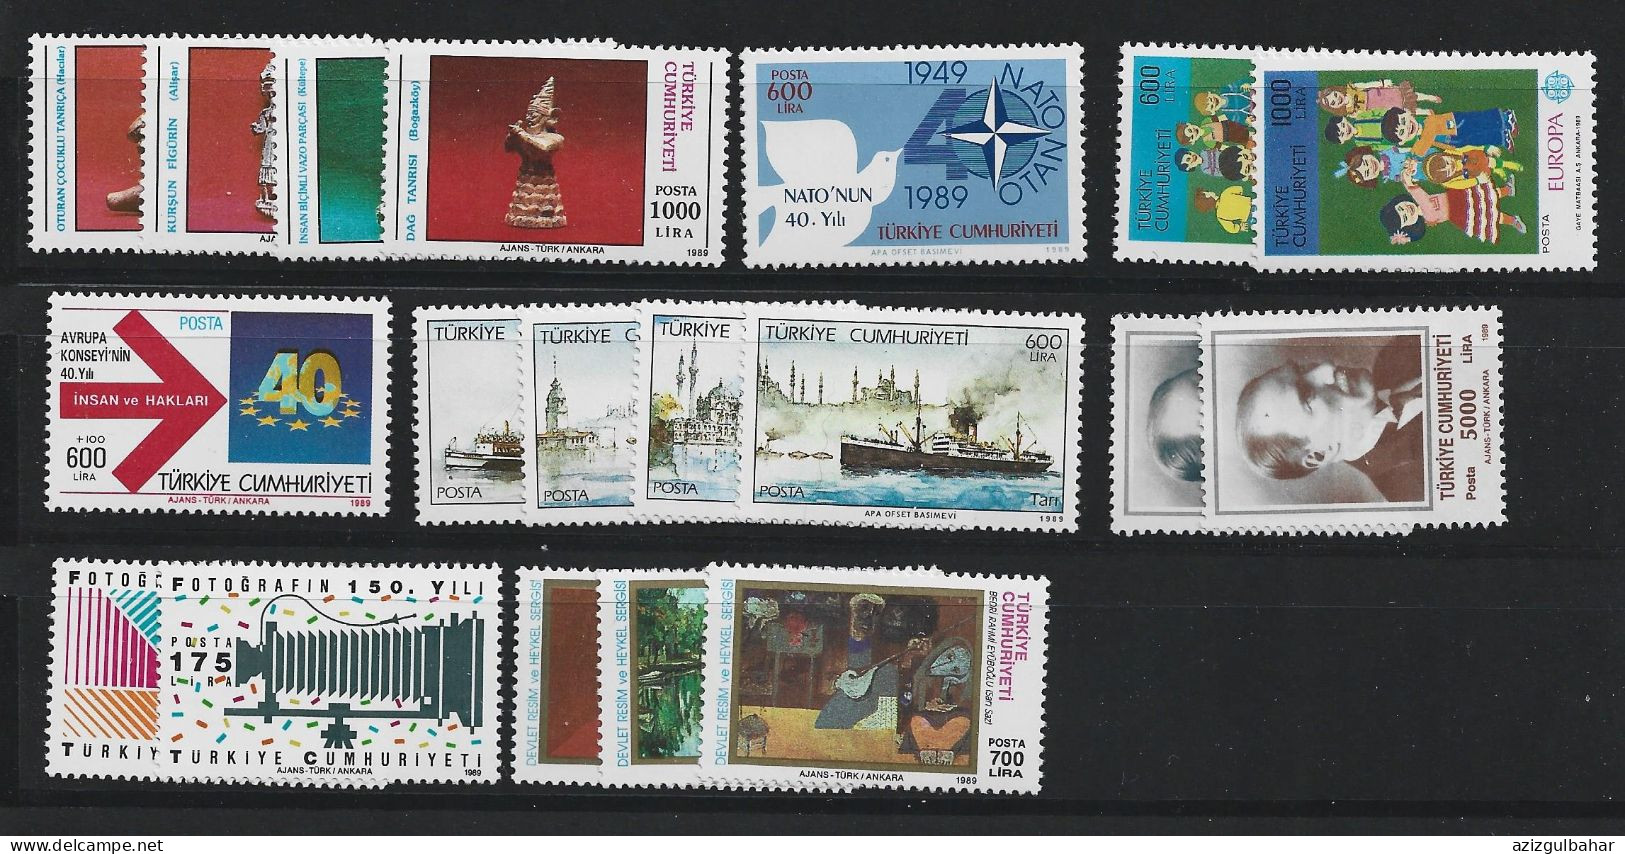 TURKEY STAMPS  - 1989 PART YEAR SET HIGH CATALOGUE VALUE - UMM - Unused Stamps